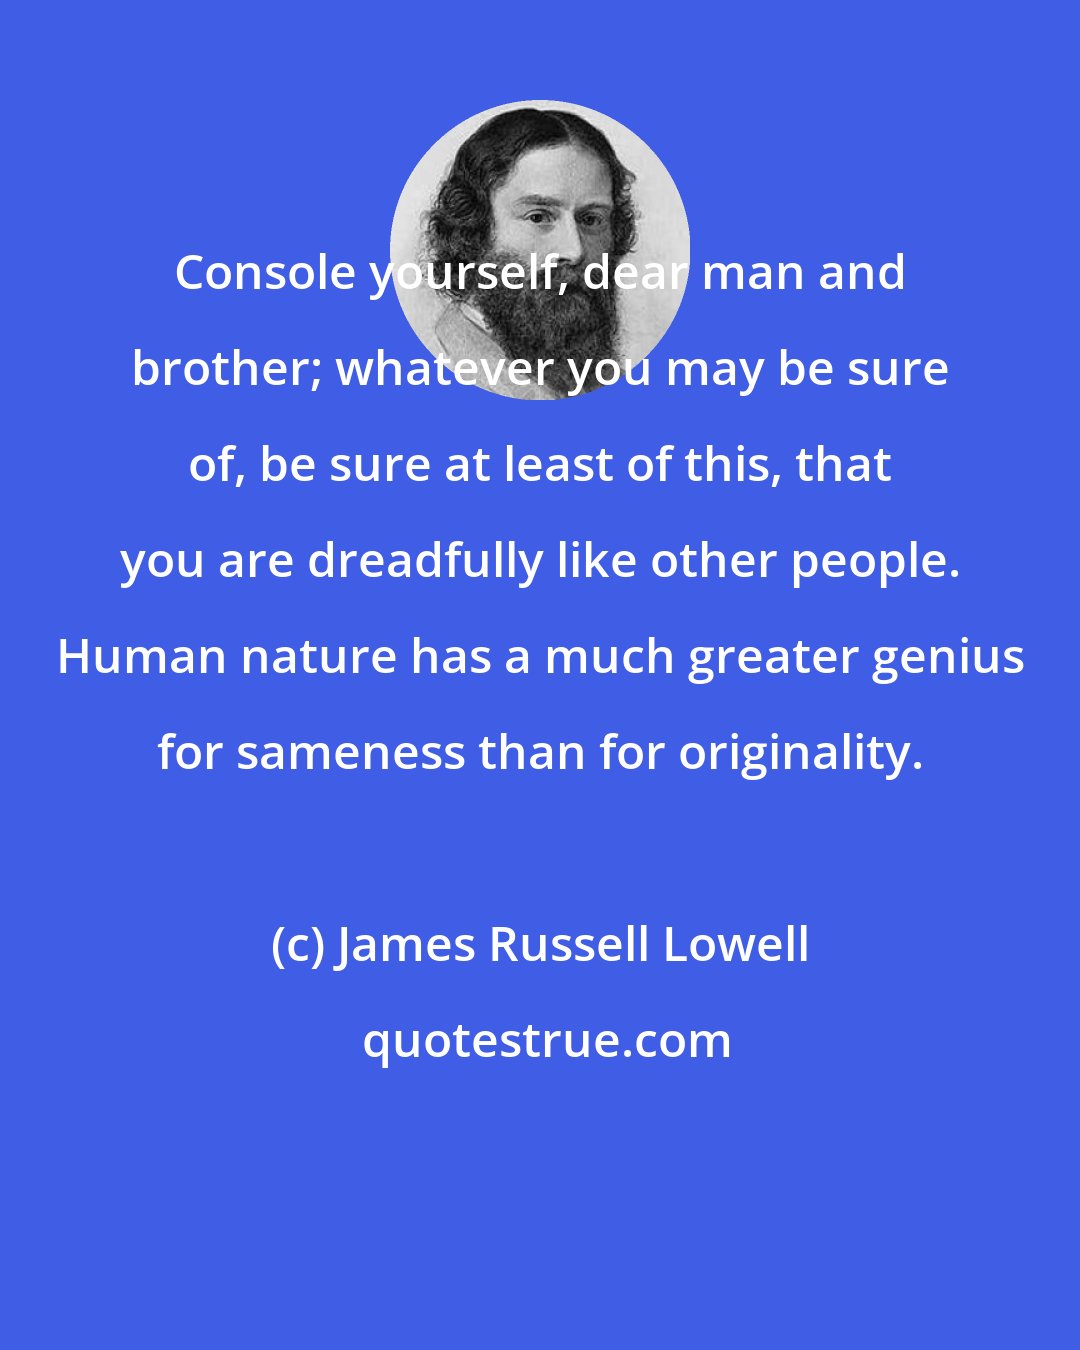 James Russell Lowell: Console yourself, dear man and brother; whatever you may be sure of, be sure at least of this, that you are dreadfully like other people. Human nature has a much greater genius for sameness than for originality.